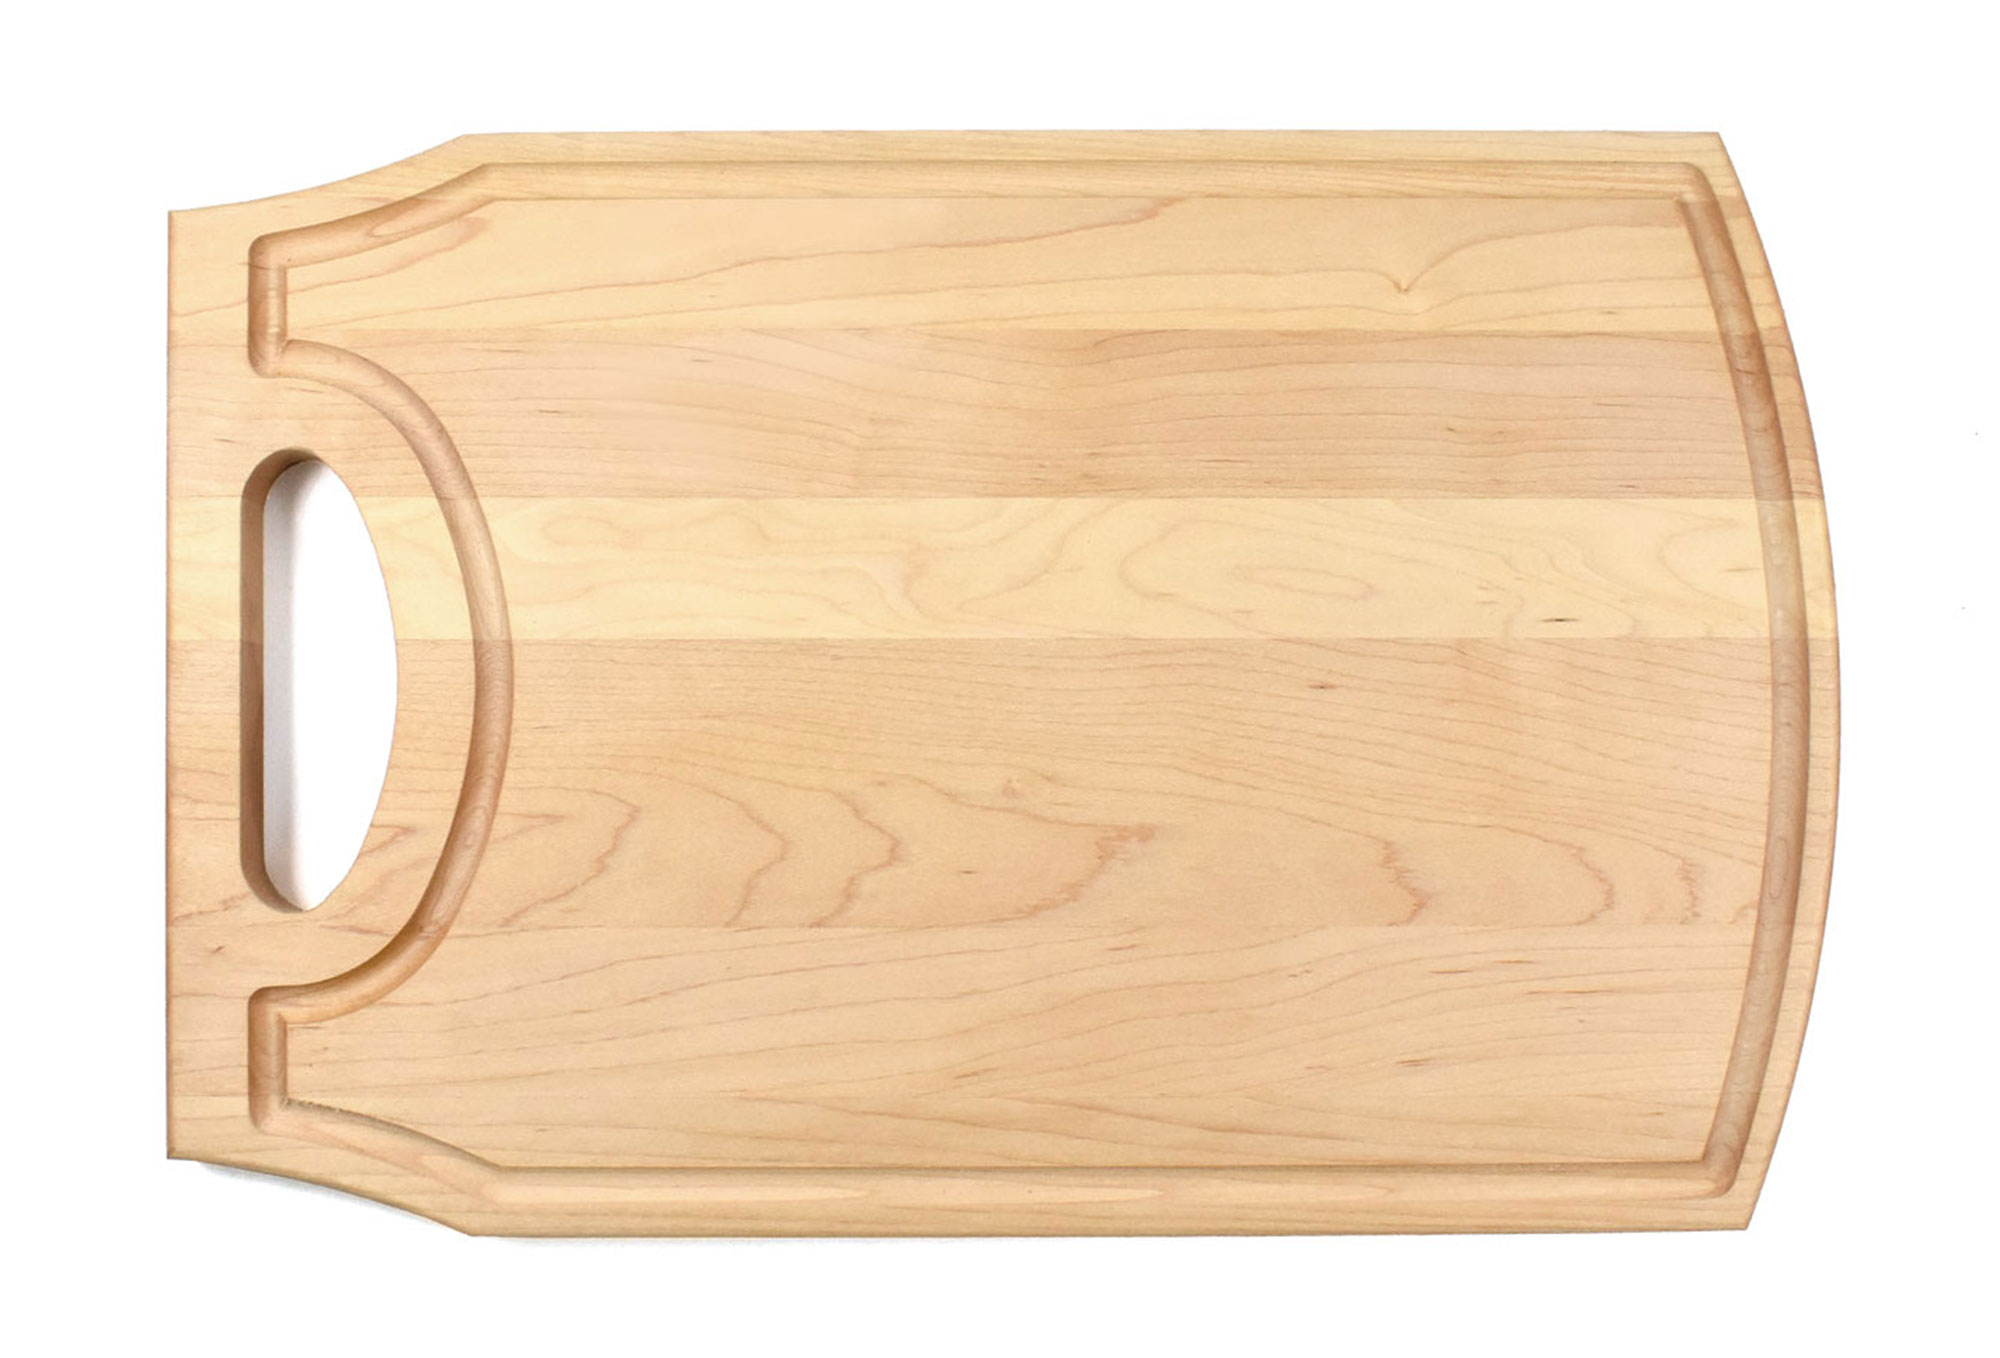 Large wooden cutting board with handle